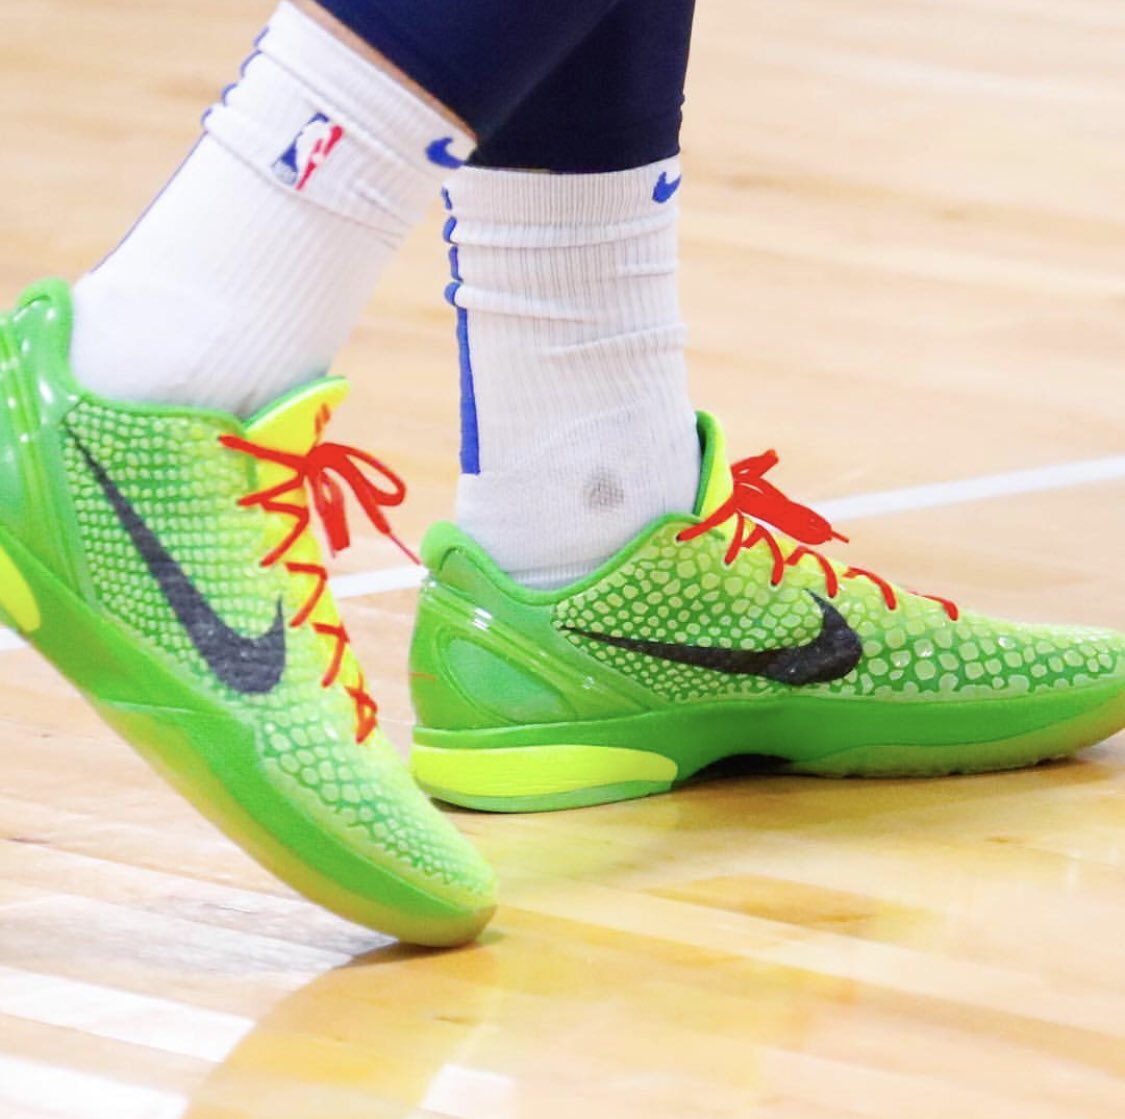 the grinch kobes